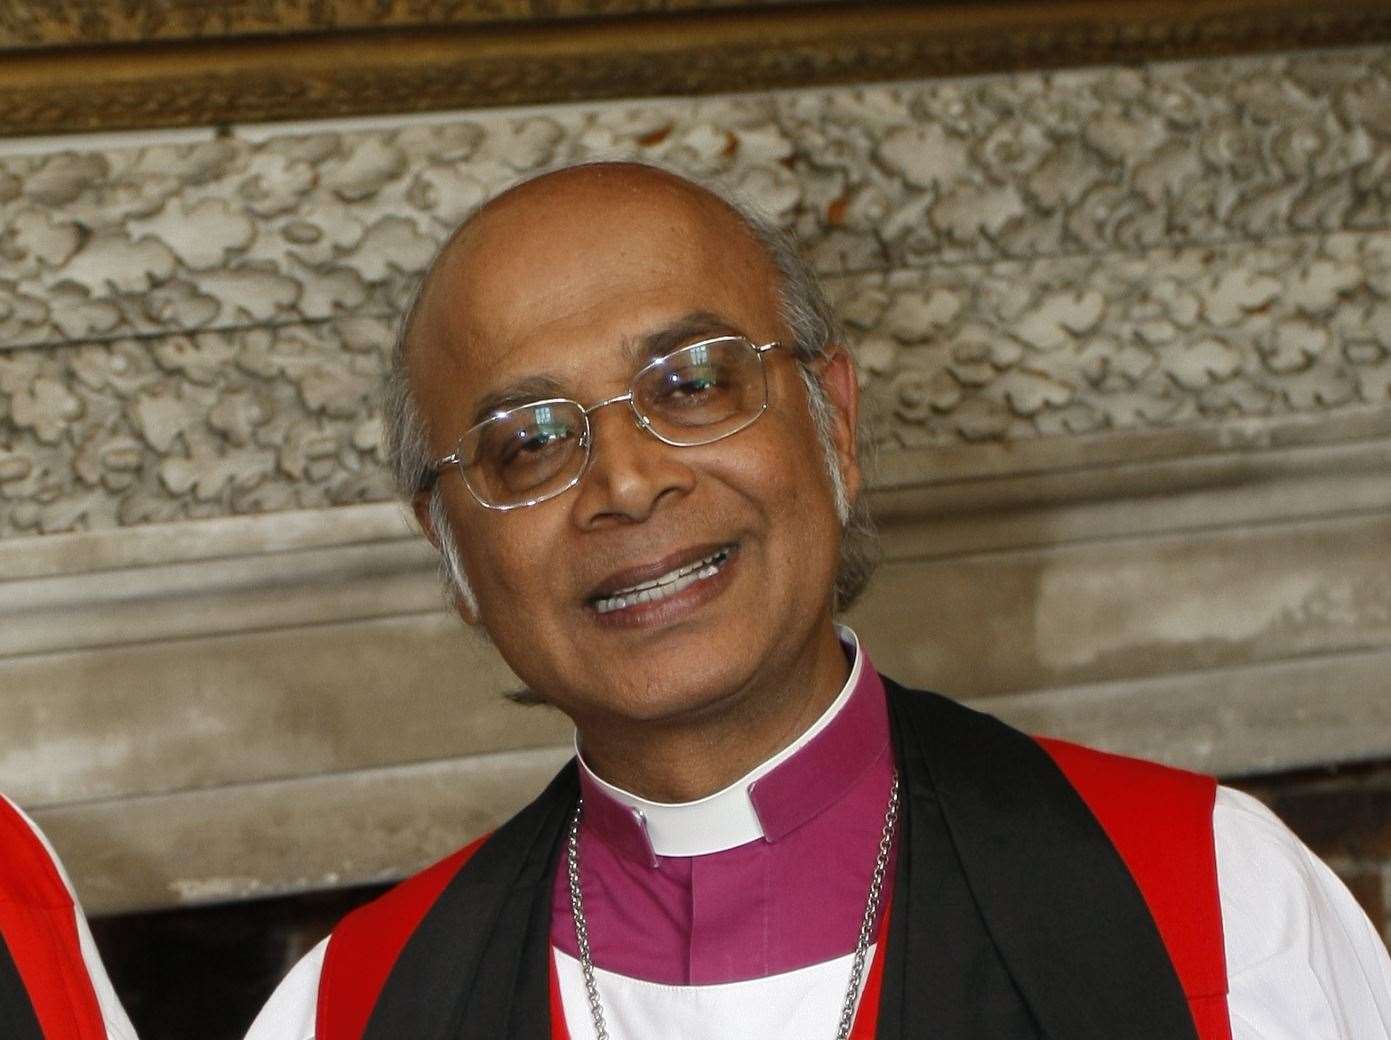 Dr Michael Nazir-Ali was Bishop of Rochester for 15 years